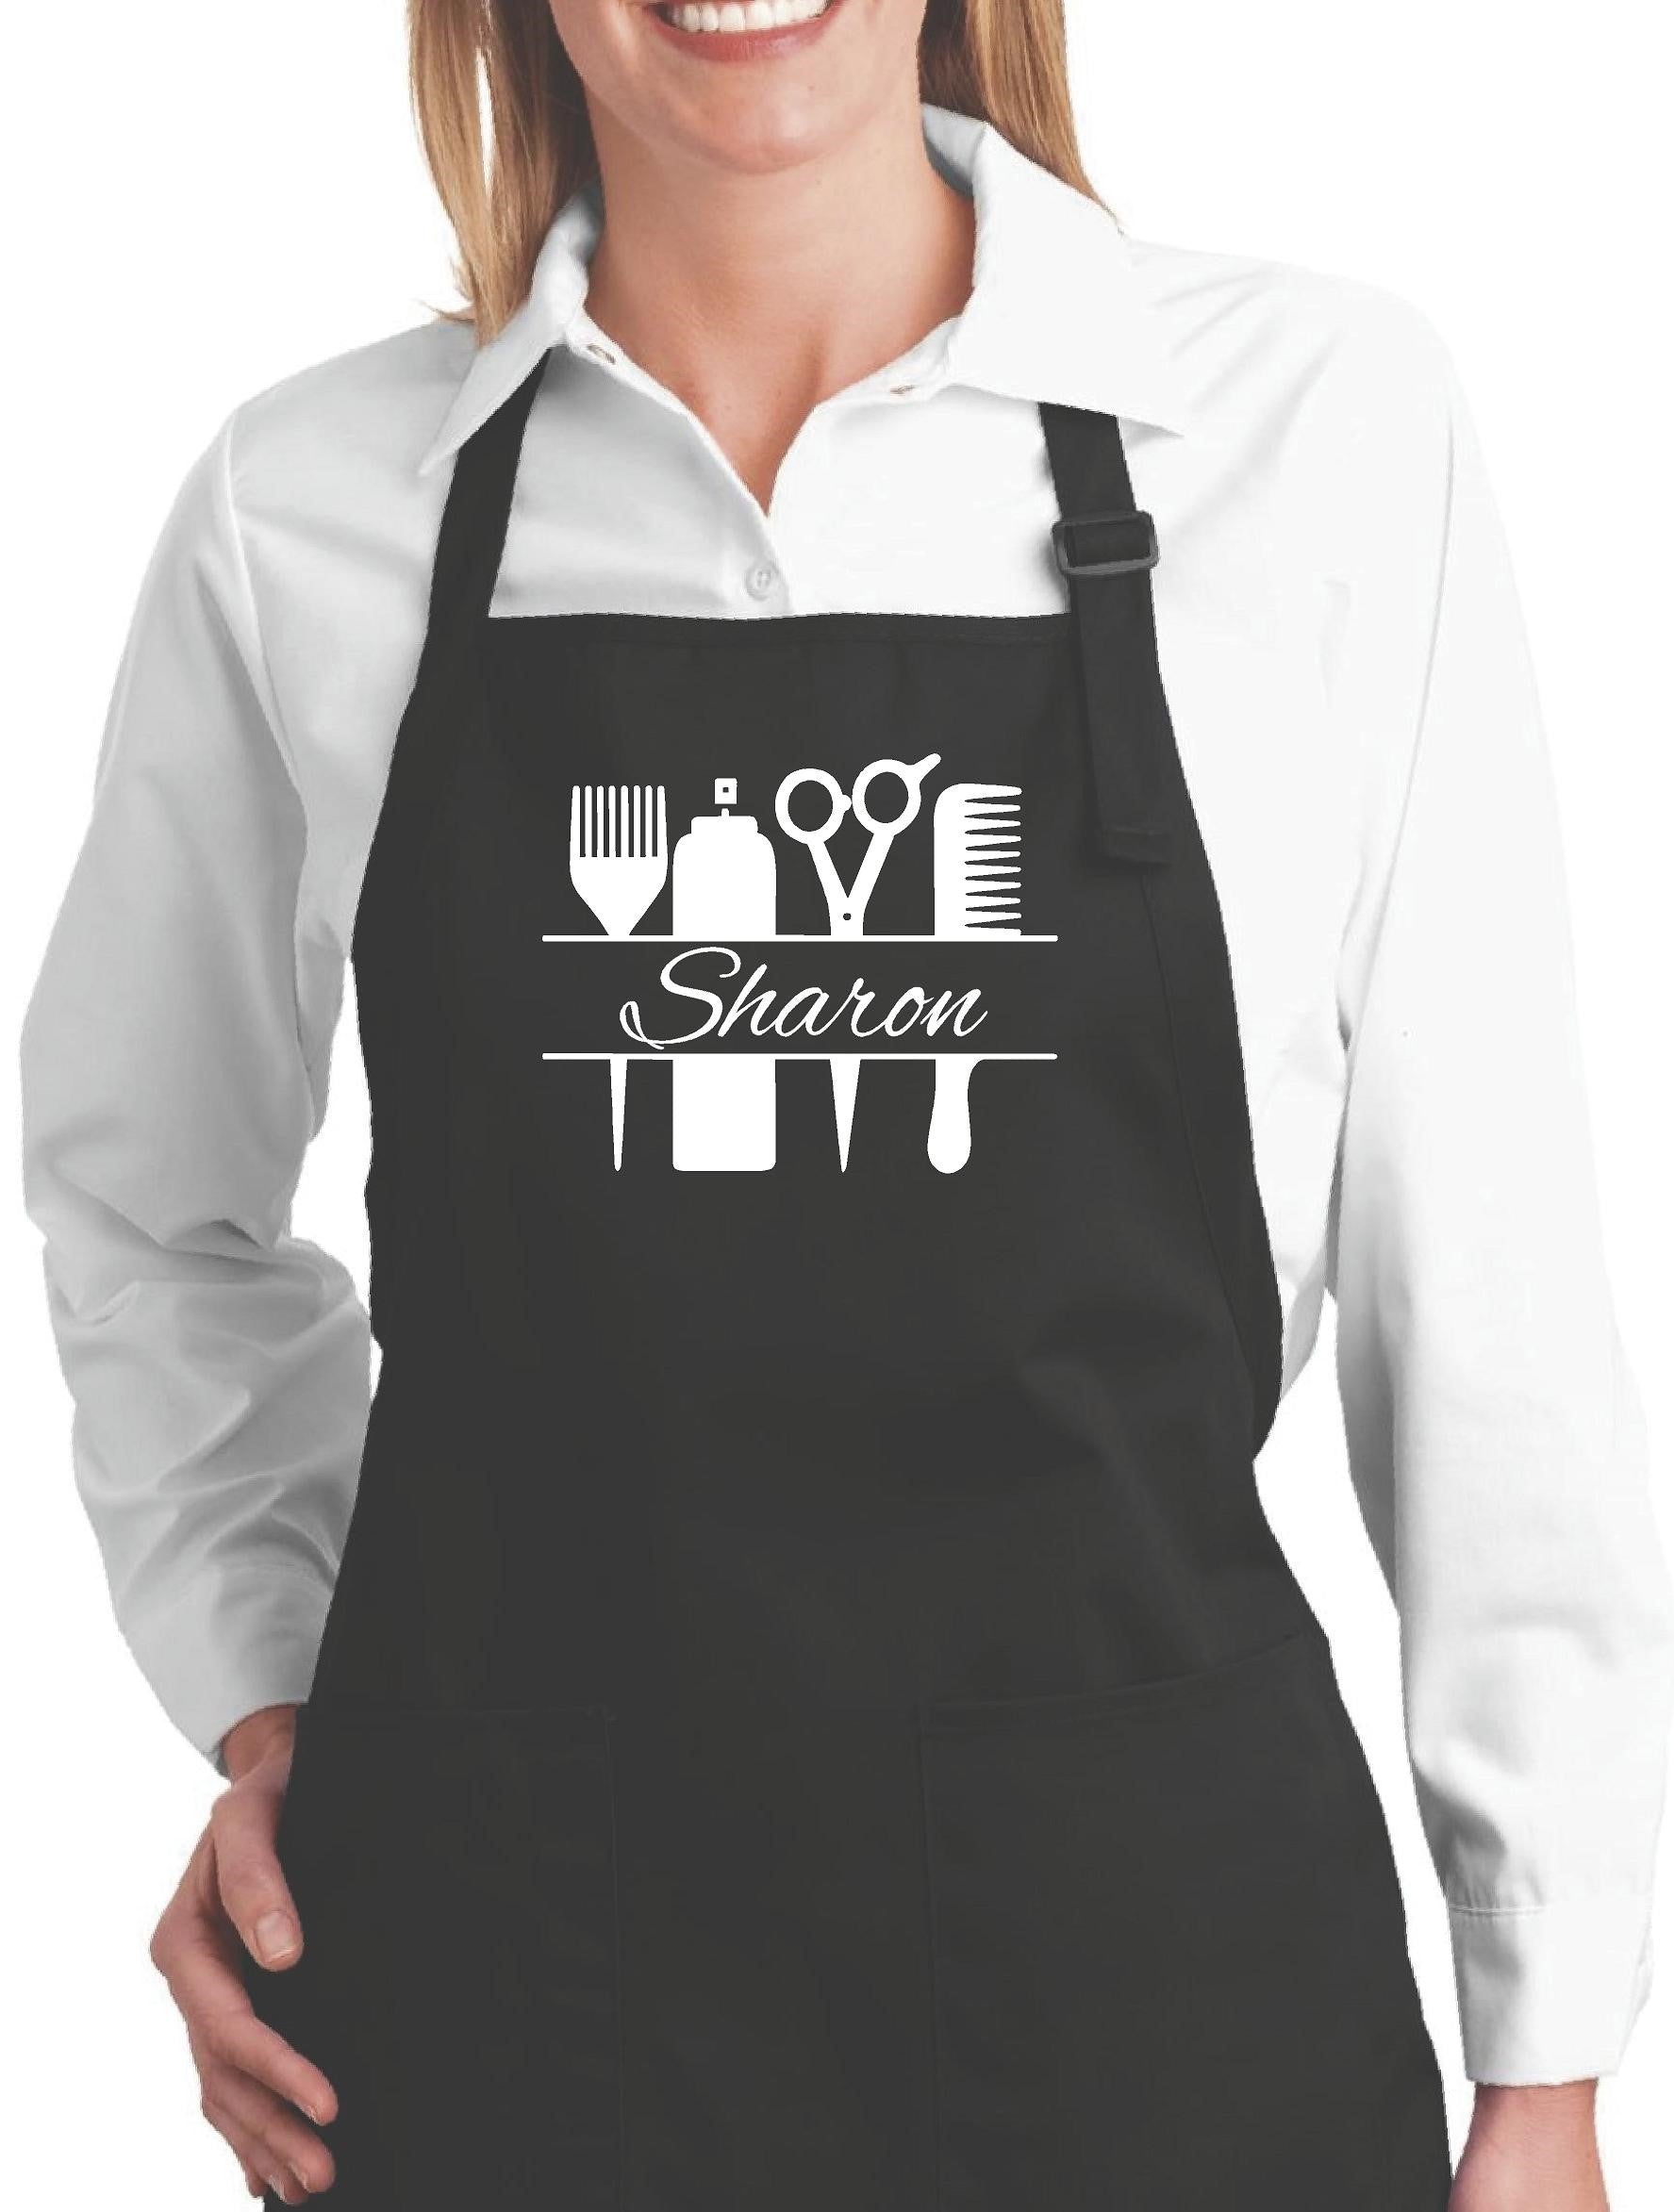 Awesome Hairdresser Funny Novelty Apron Kitchen Cooking 